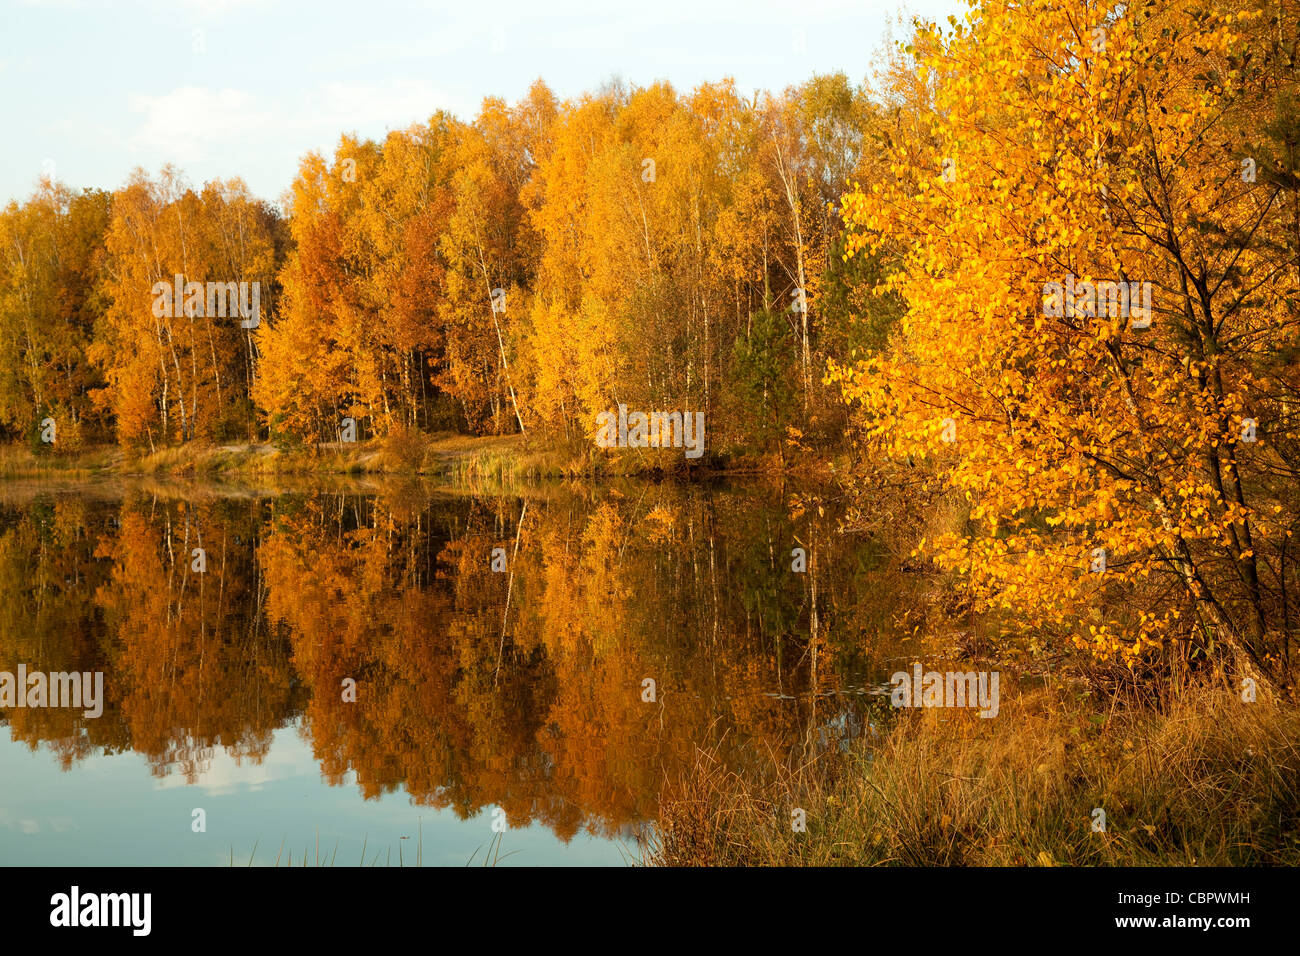 birch forest and pond in autumn scenery Stock Photo